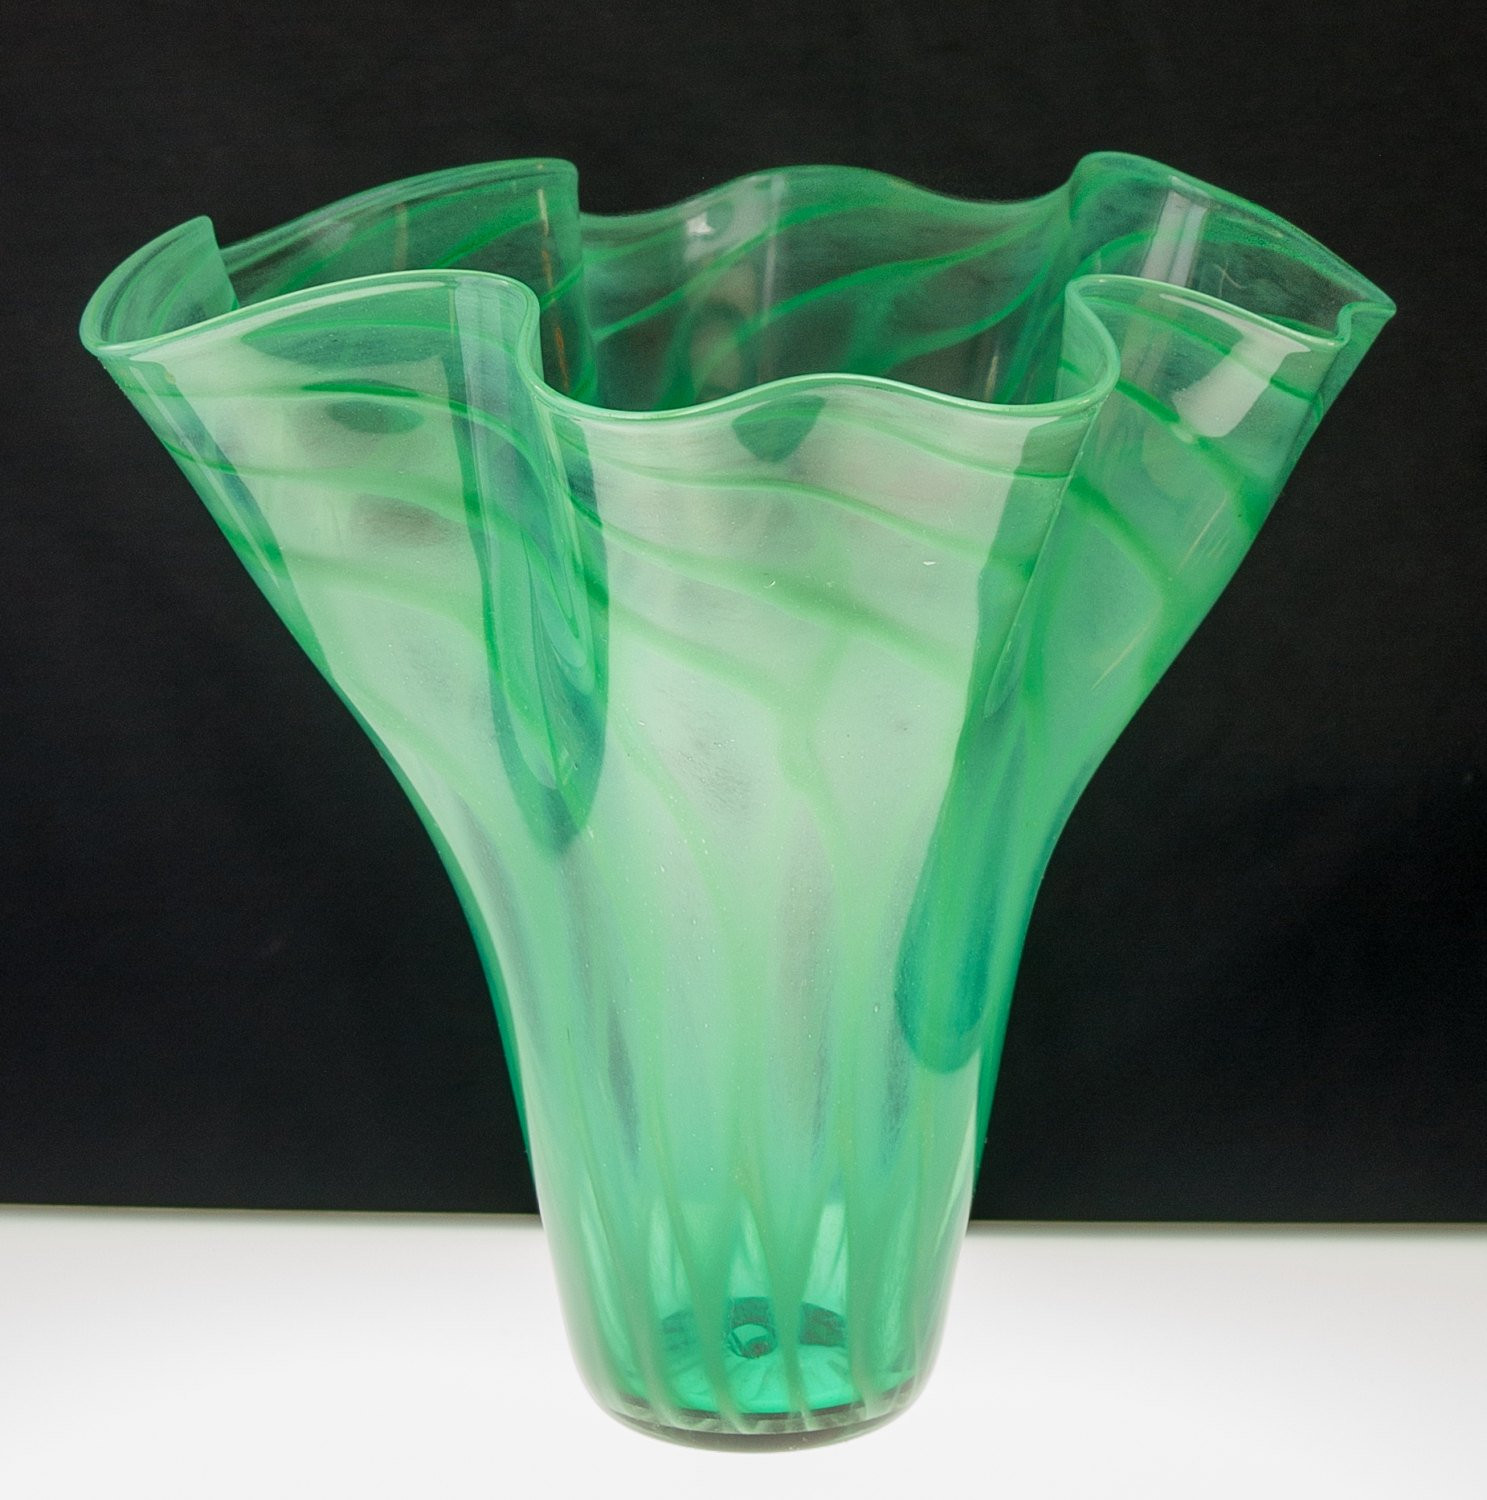 chihuly glass vase of vase art glass hand made blown glass lachausee 1991 etsy pertaining to dzoom